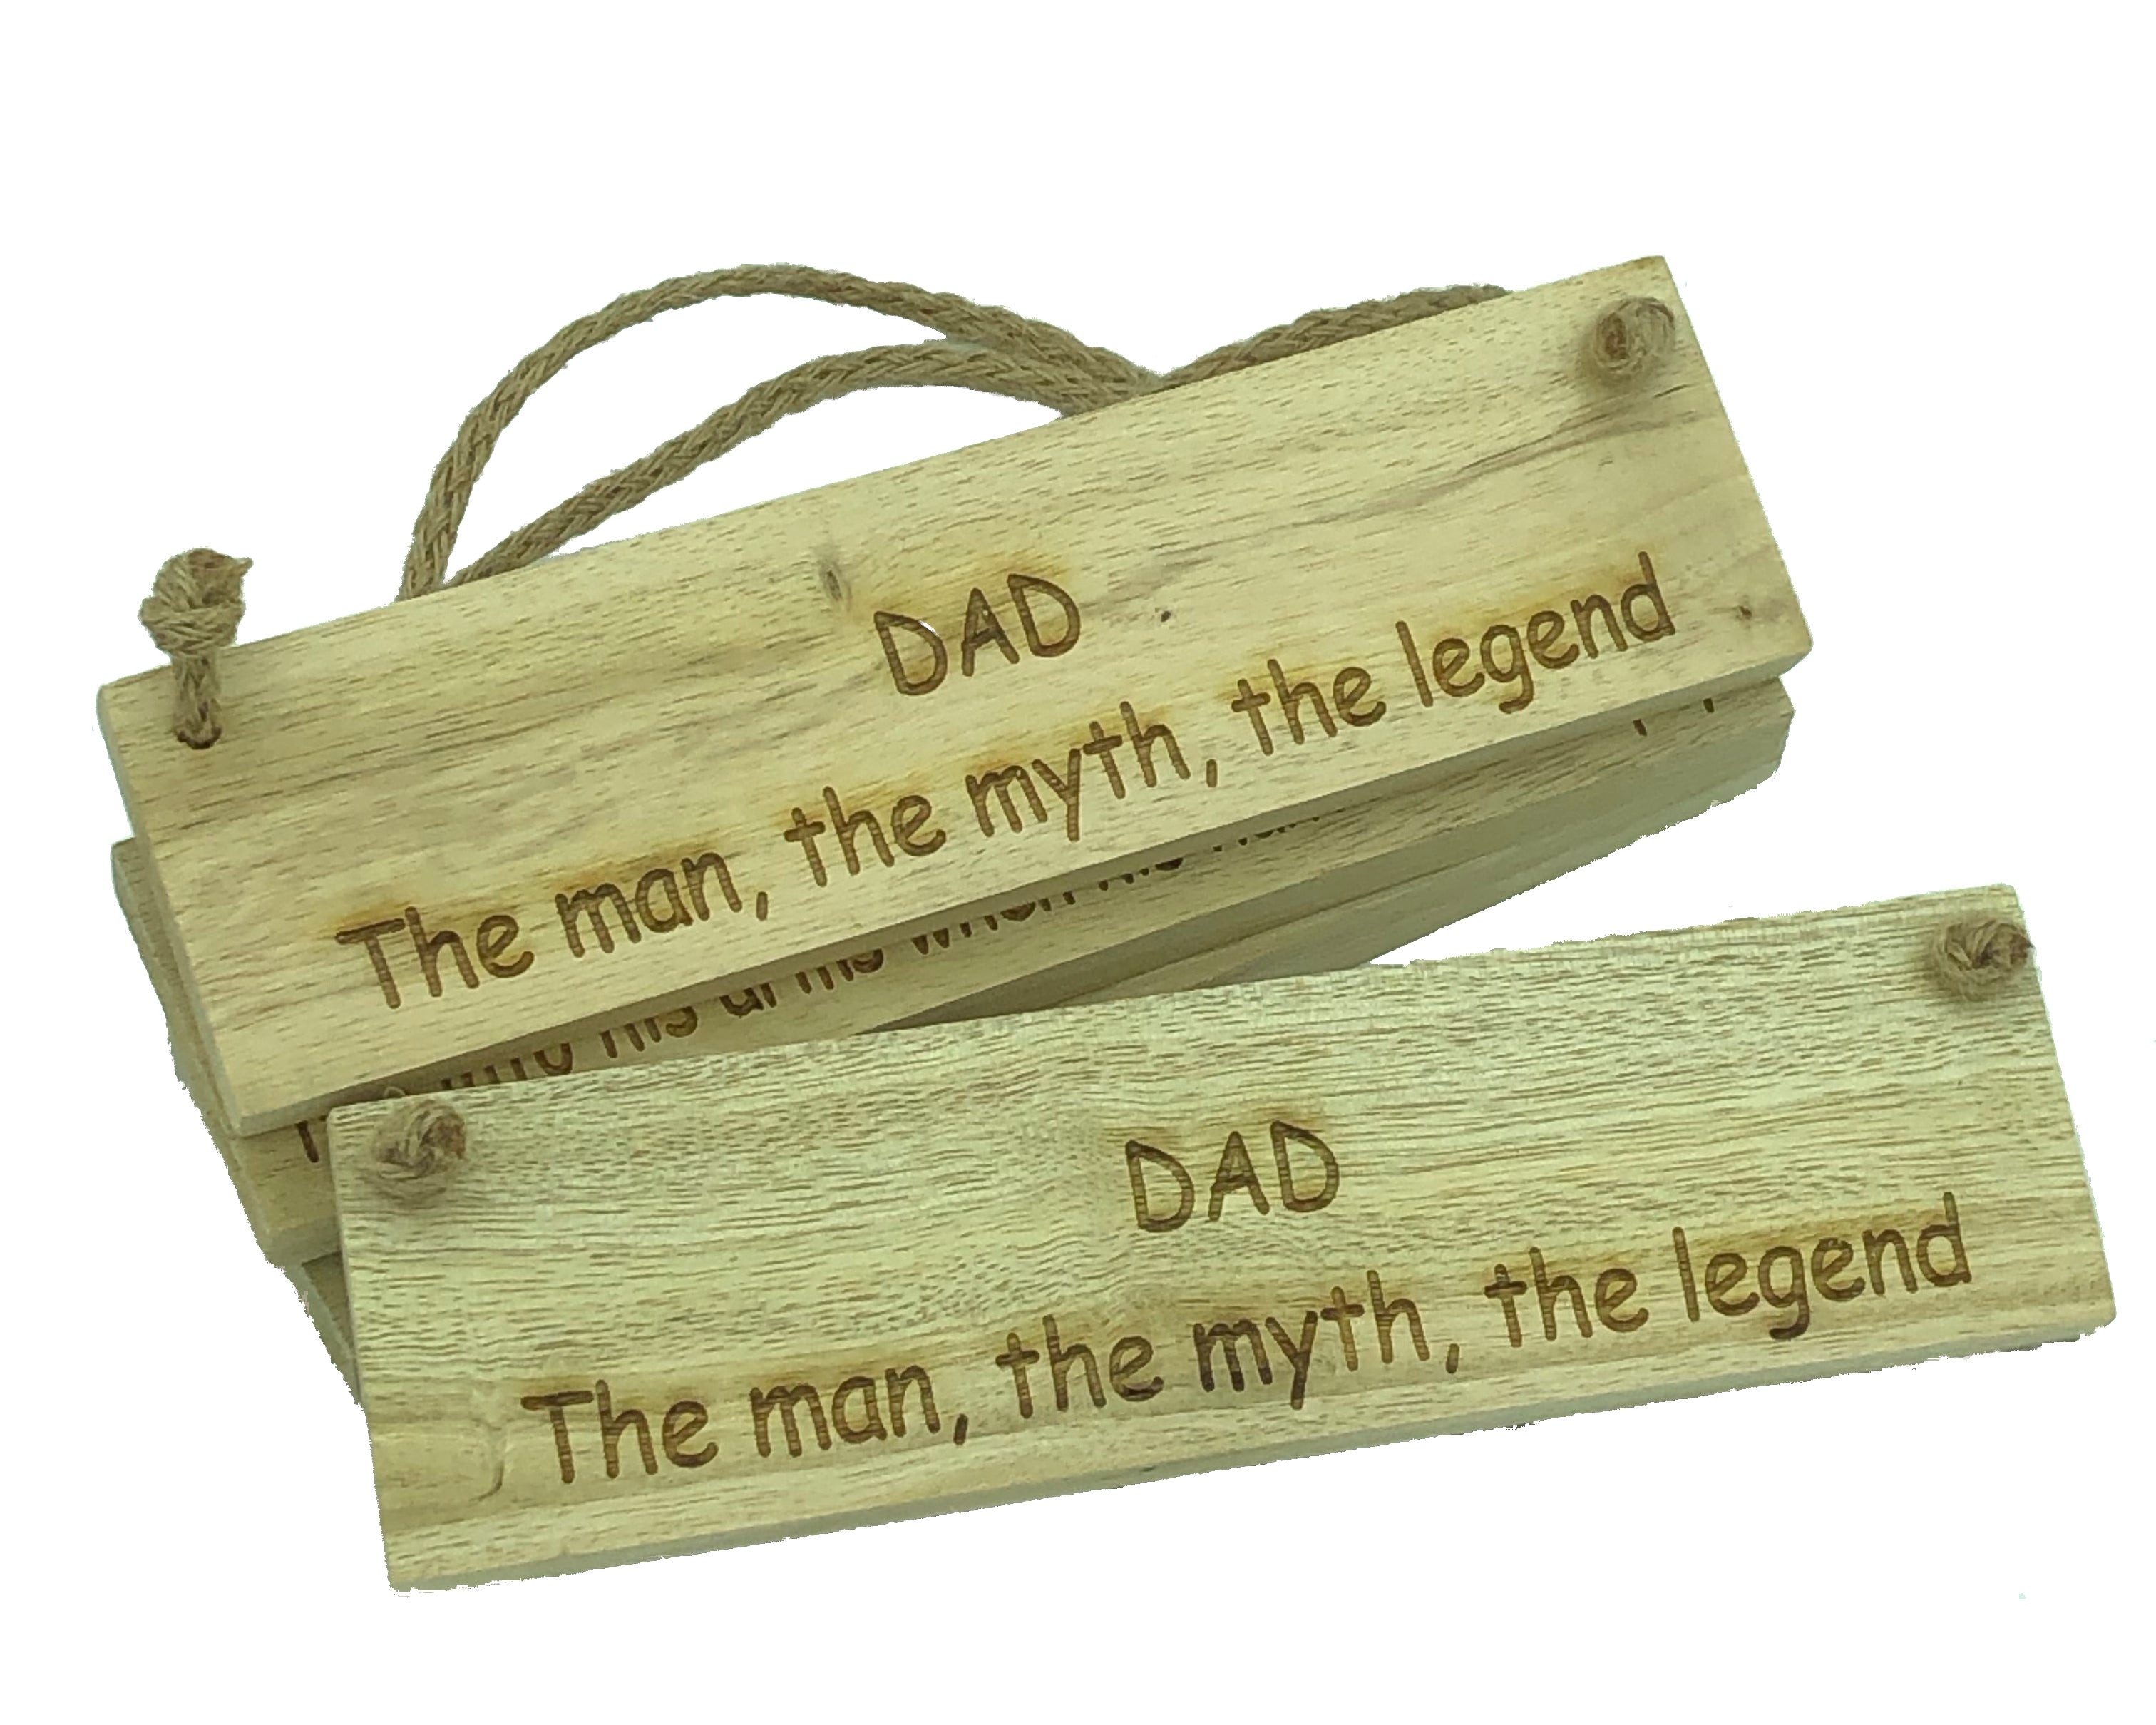 Unusual fathers day gifts - coasters, cassettes, plaques